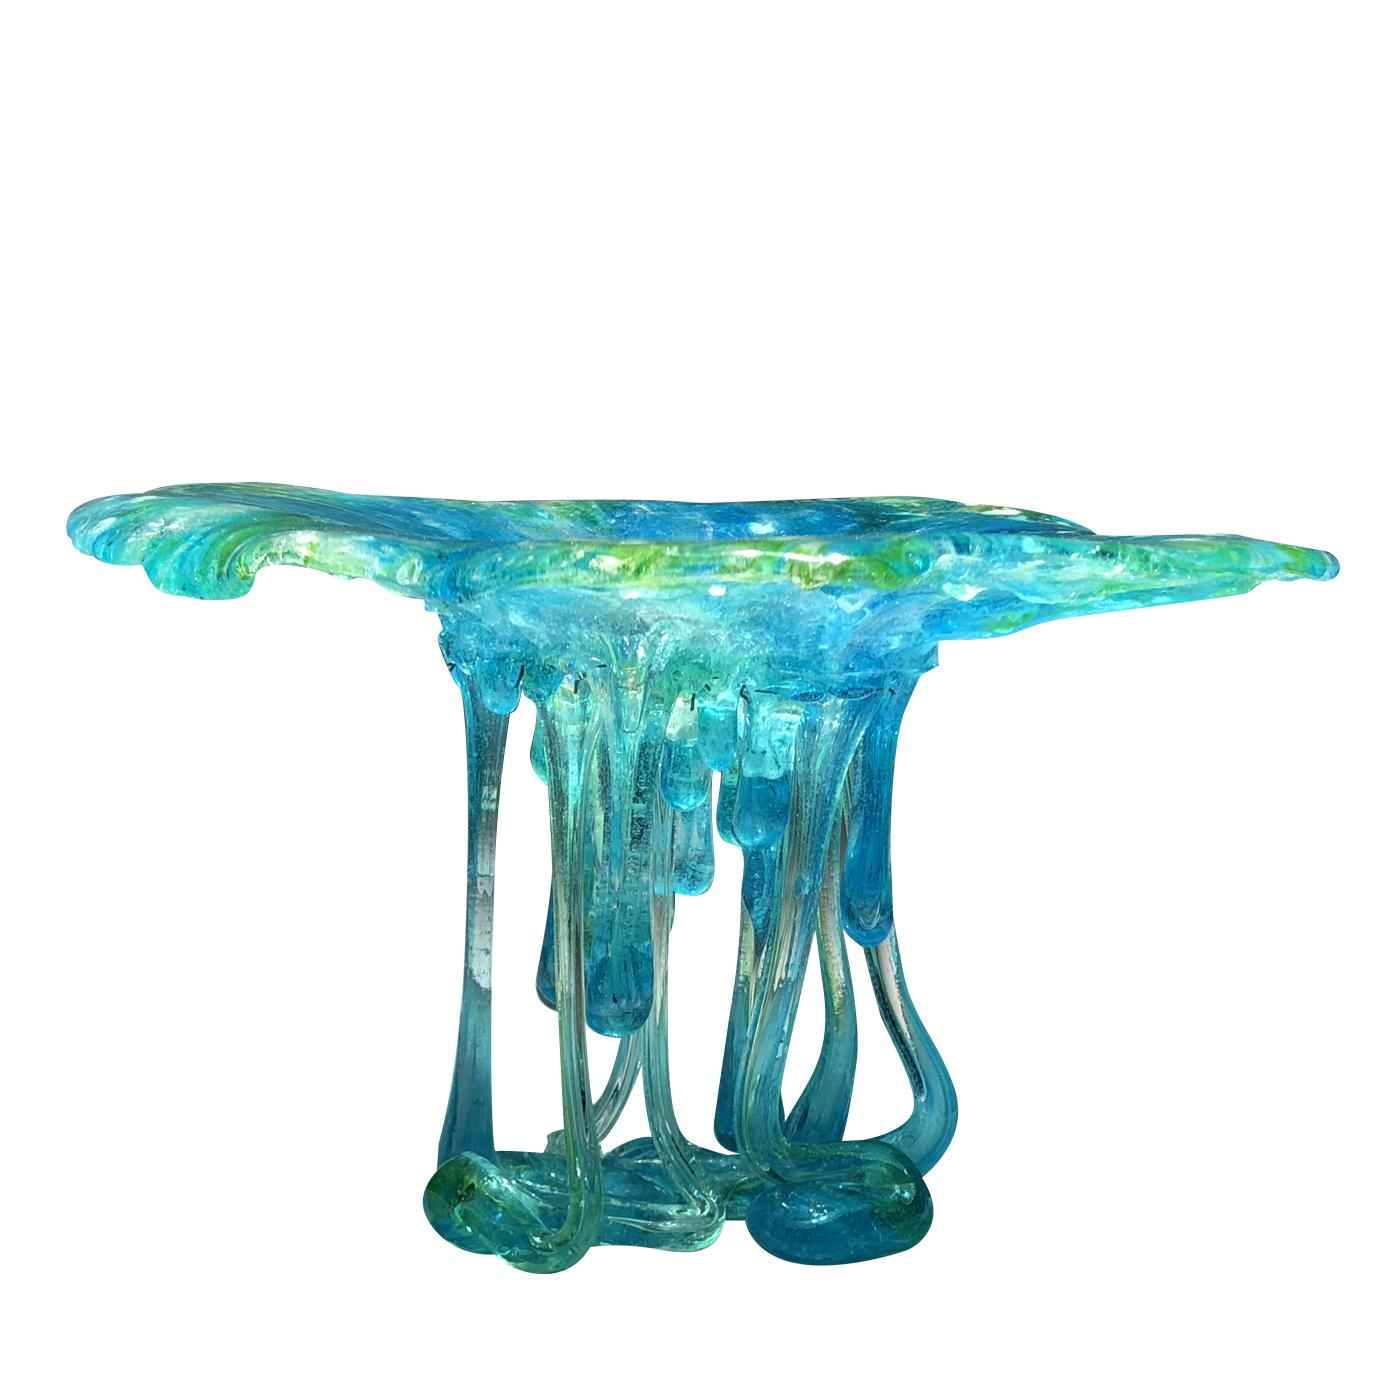 The elegance of the jellyfish is conjured up with this unique Murano glass sculpture in dark and light blues. The flowing, open top of the sculpture and the dripping, coiled section underneath is reminiscent of a flowing jellyfish and its tentacles.